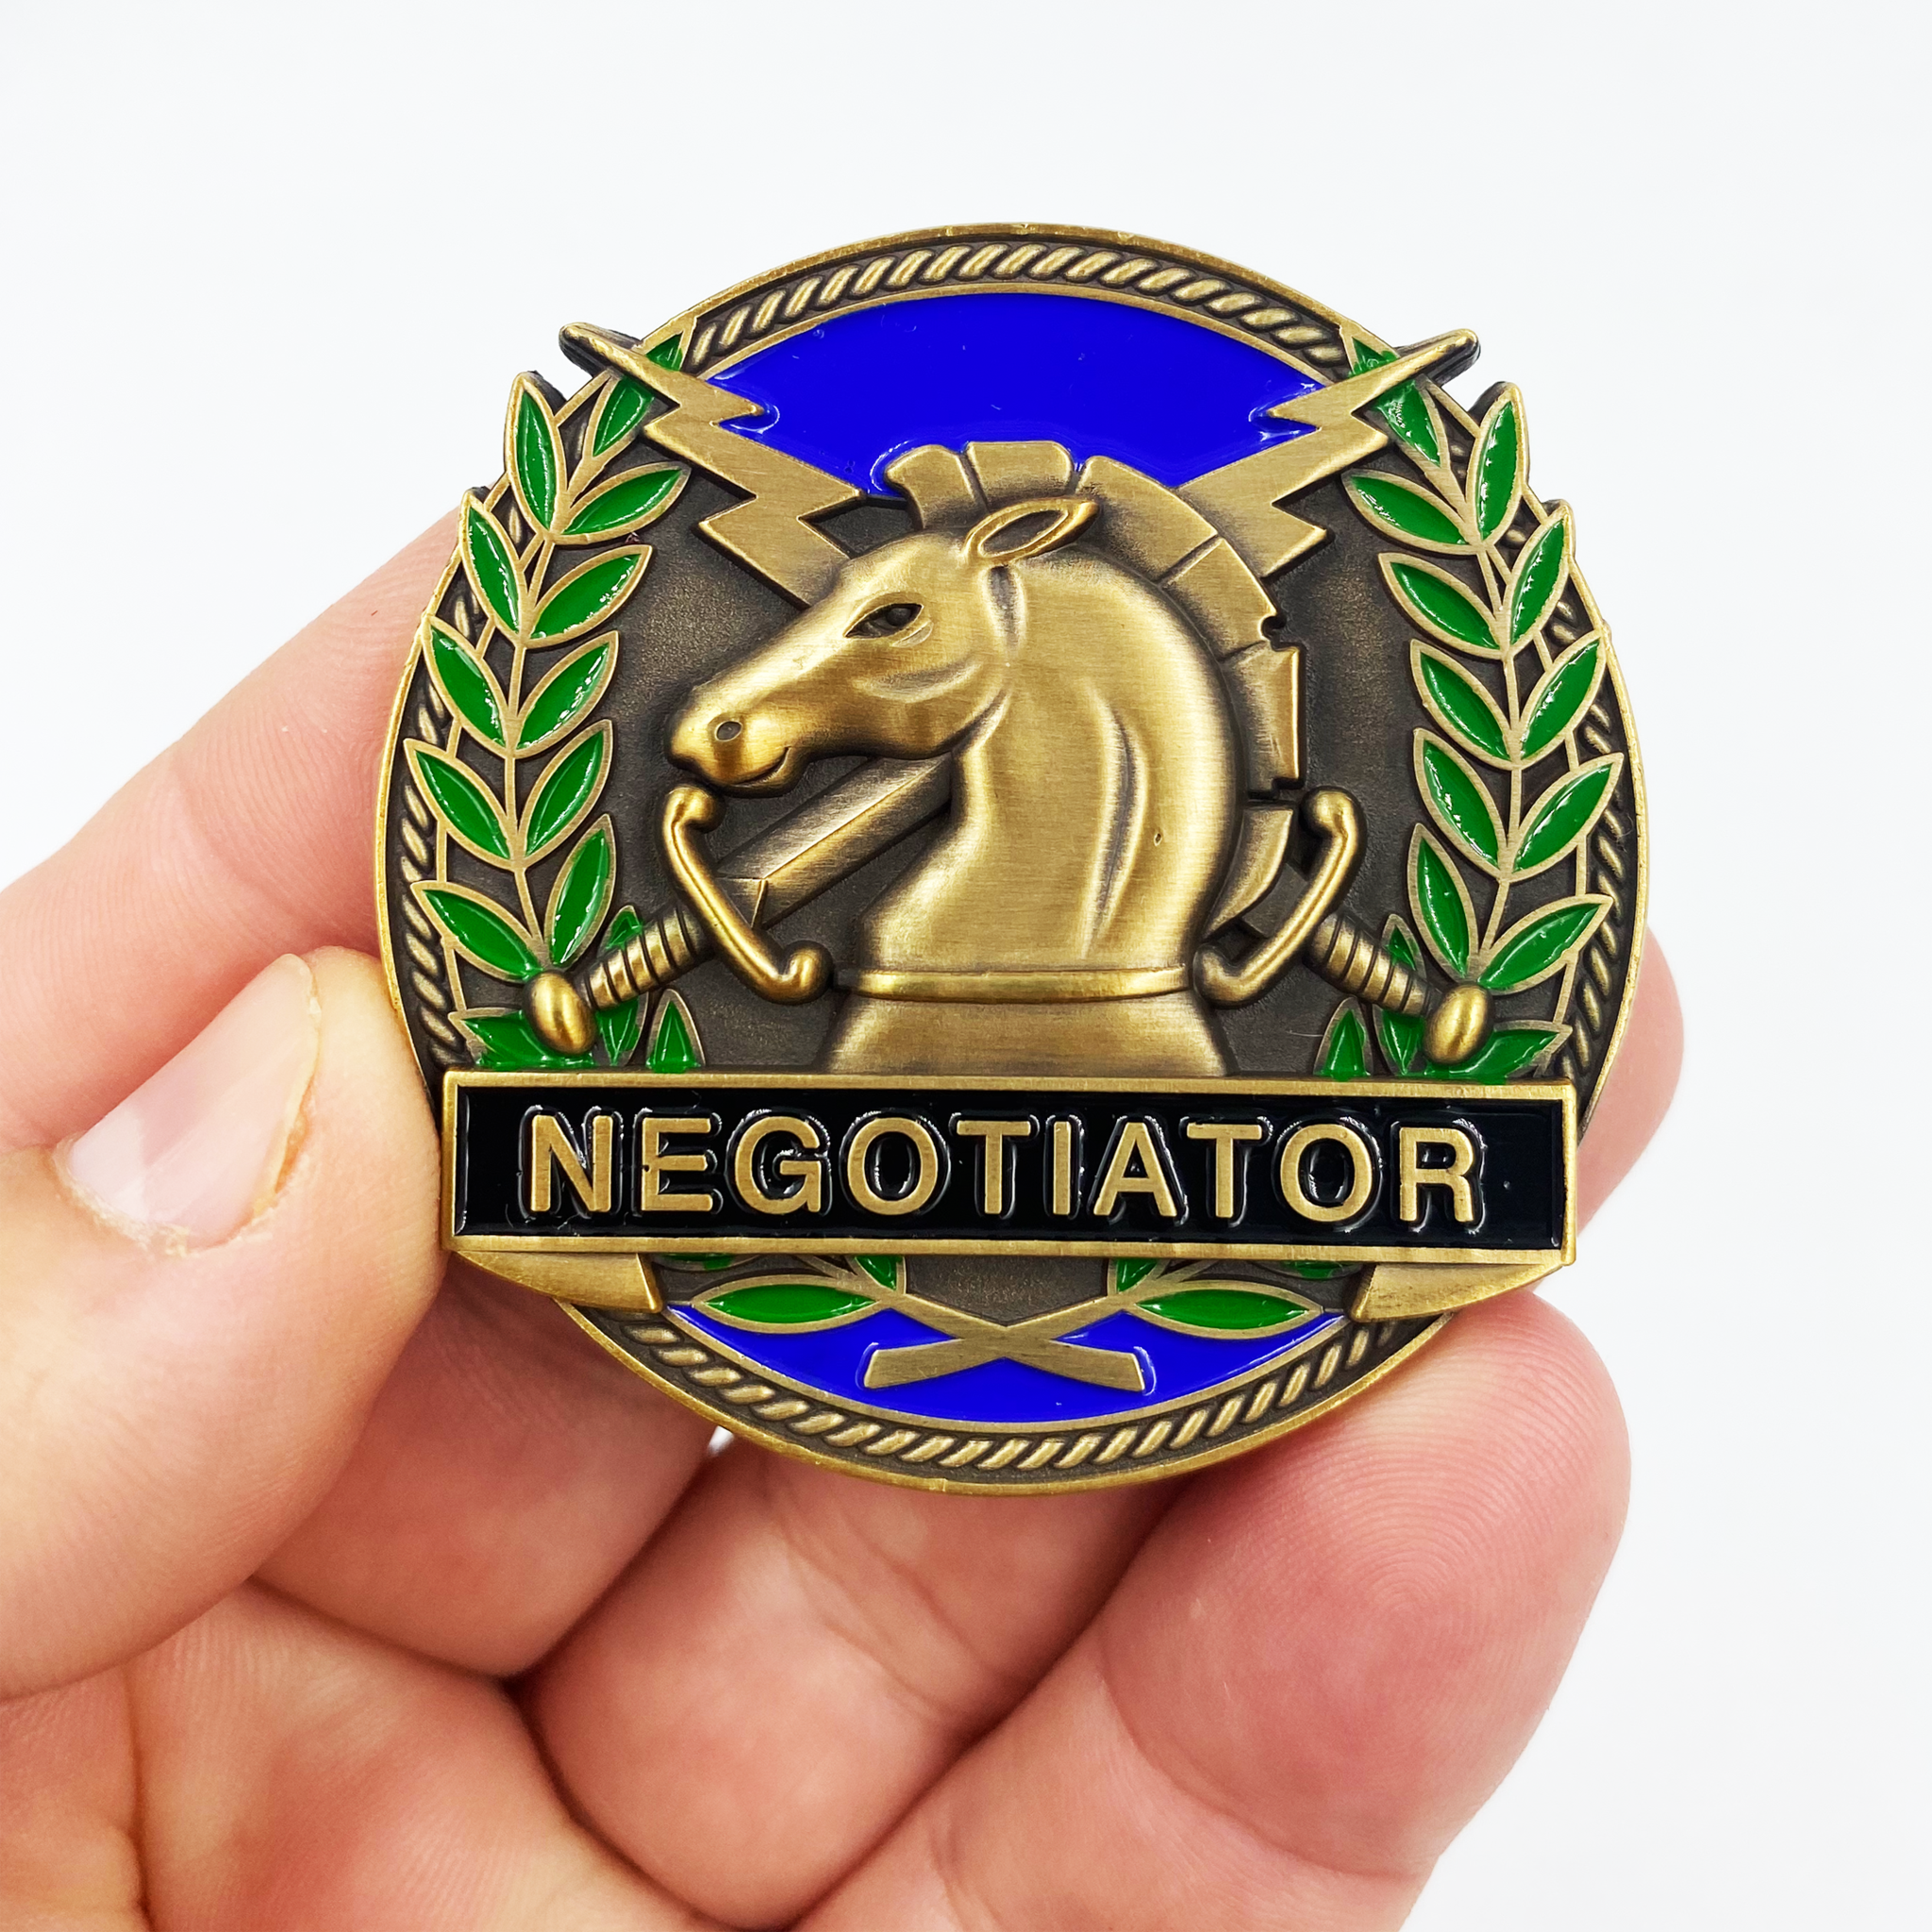 CPD NYPD Challenge Negotiator Minneapolis CHP Police BSO Coin CL3-05 LAPD